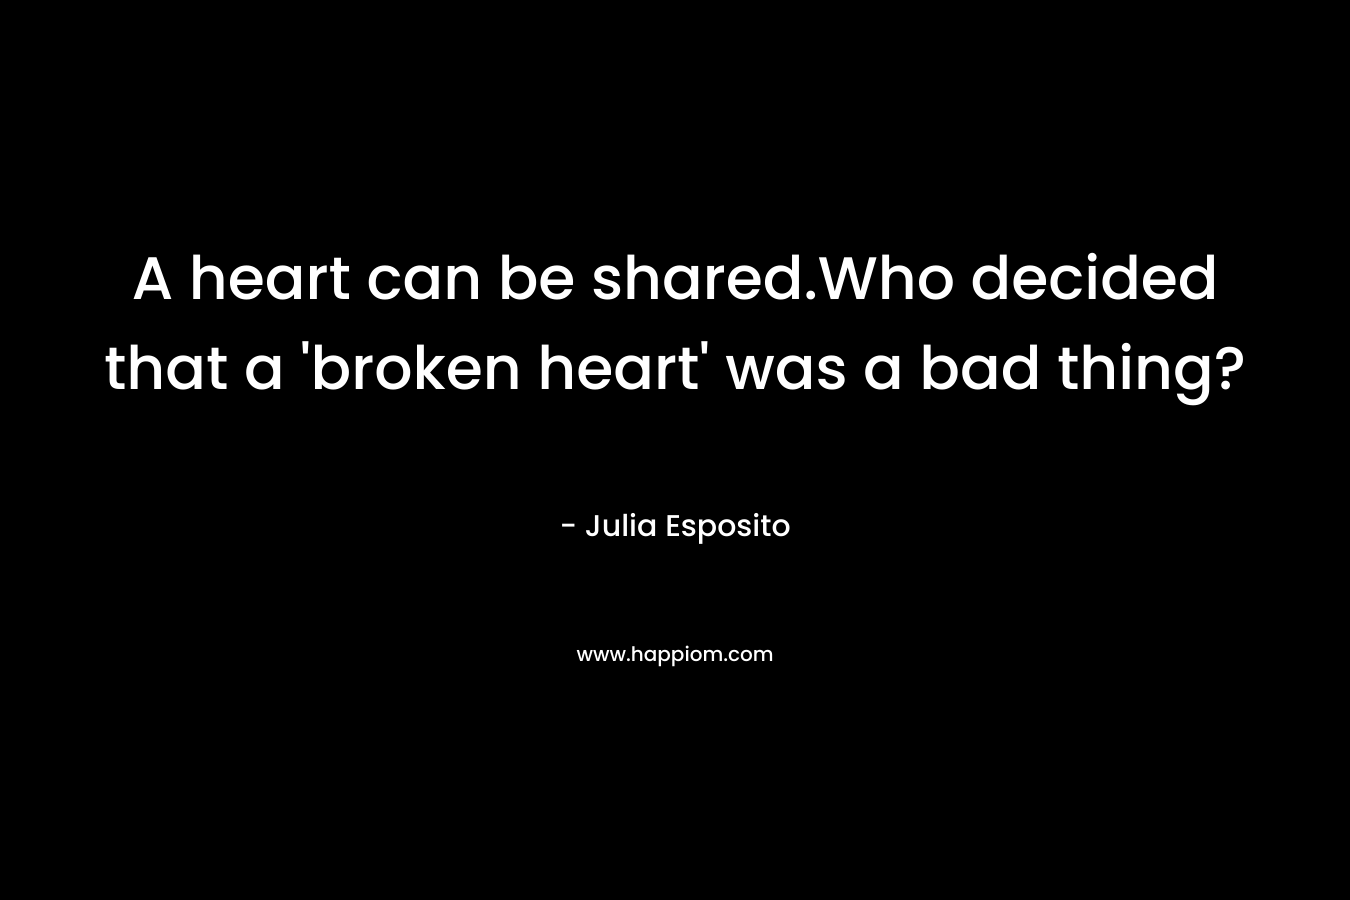 A heart can be shared.Who decided that a 'broken heart' was a bad thing?